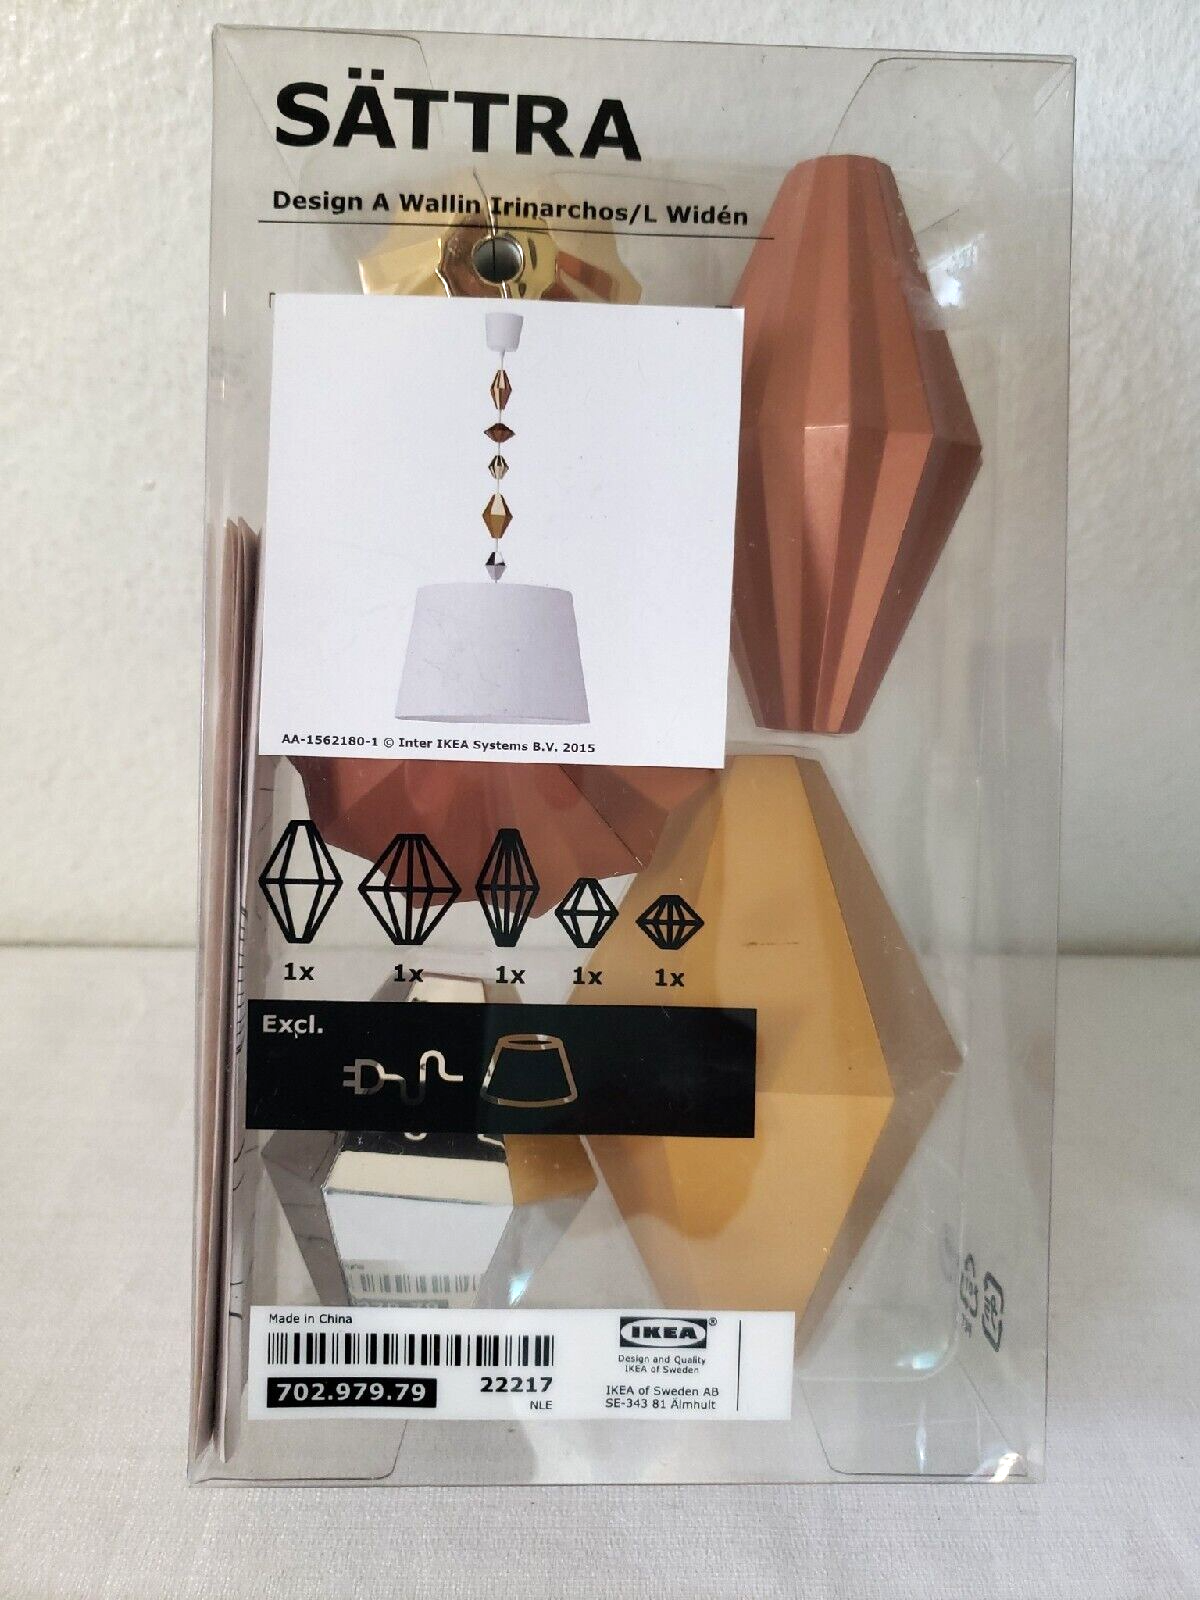 Ikea Hanging Lamp Sattra Accessory Cord  22217 5pc Set in package New Old Stock - $24.73